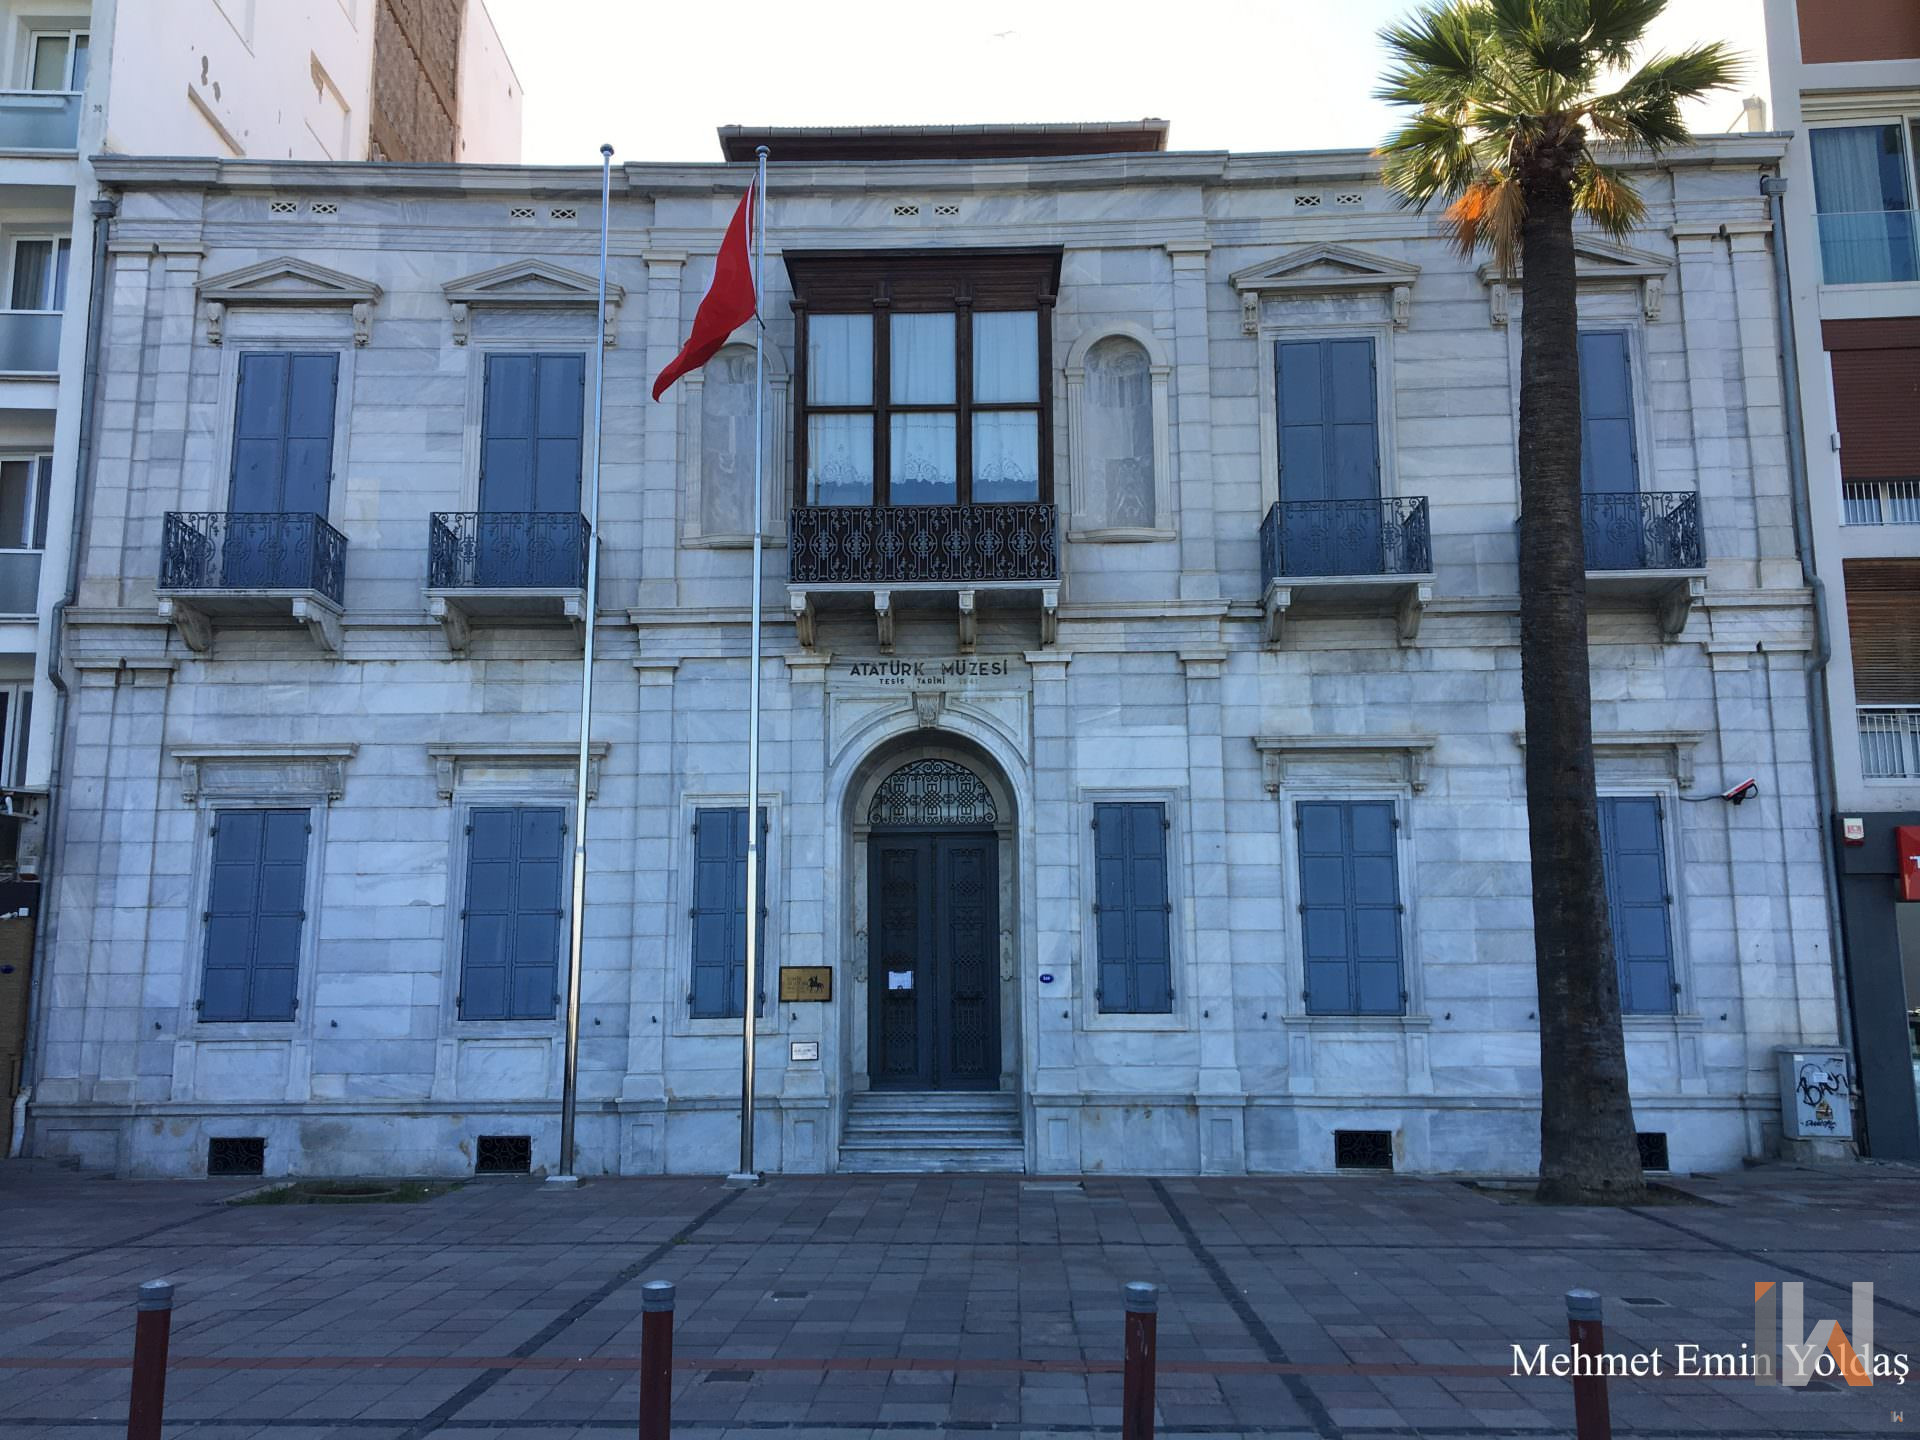 <h3>ATATÜRK MUSEUM</h3>The Atatürk Museum is located in a building known today as the hotel where Mustafa Kemal Atatürk stayed. Initially used as accommodation for the founder of the Republic of Turkey, the building was later purchased by the Izmir Municipality and presented as a gift to Atatürk. After Atatürk's passing, this historic building was transformed into a special museum showcasing Atatürk's writings and personal belongings. This museum provides visitors with a significant insight into the founding period of Turkey.